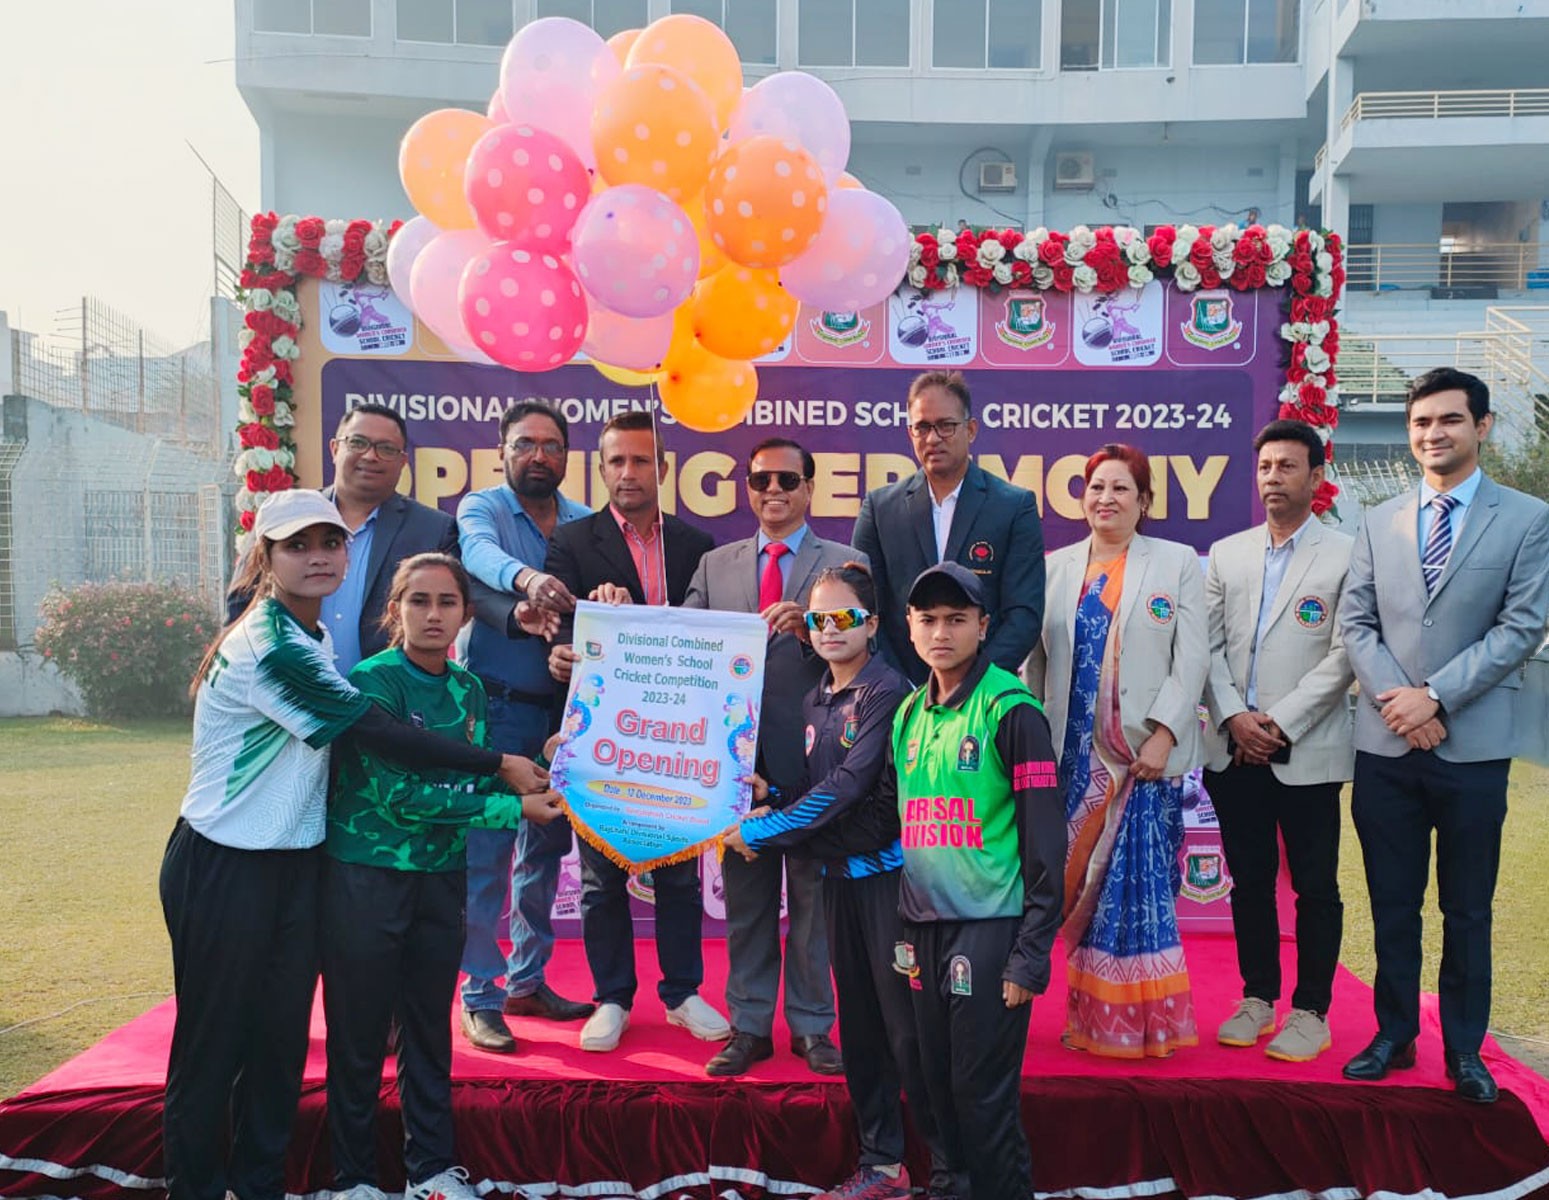 1st Edition of Divisional Women’s Combined School Cricket 2023-24 Inaugurated